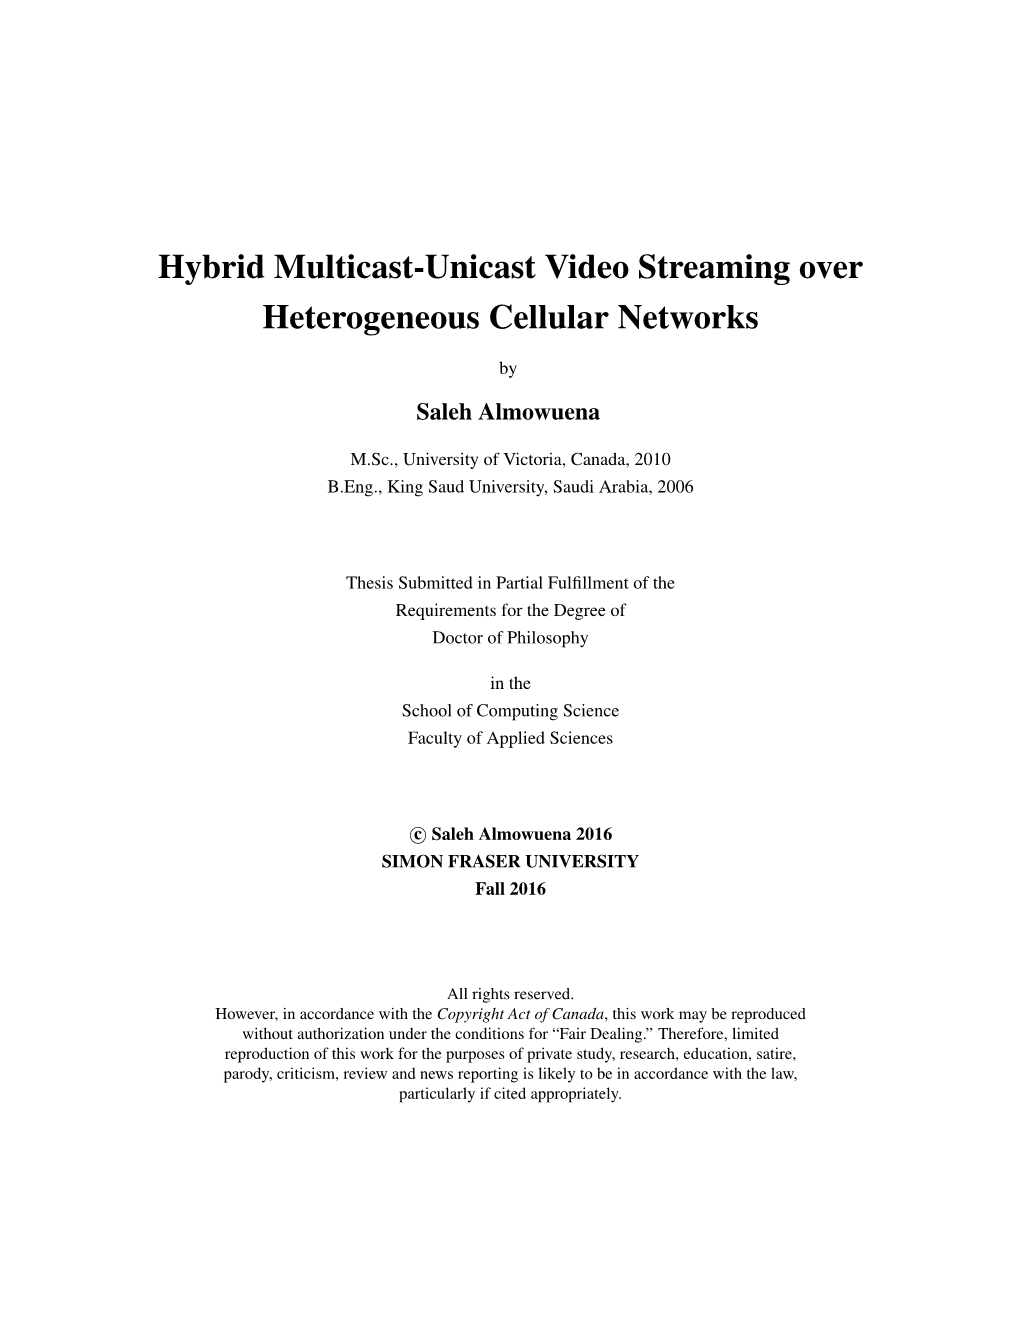 Hybrid Multicast-Unicast Video Streaming Over Heterogeneous Cellular Networks